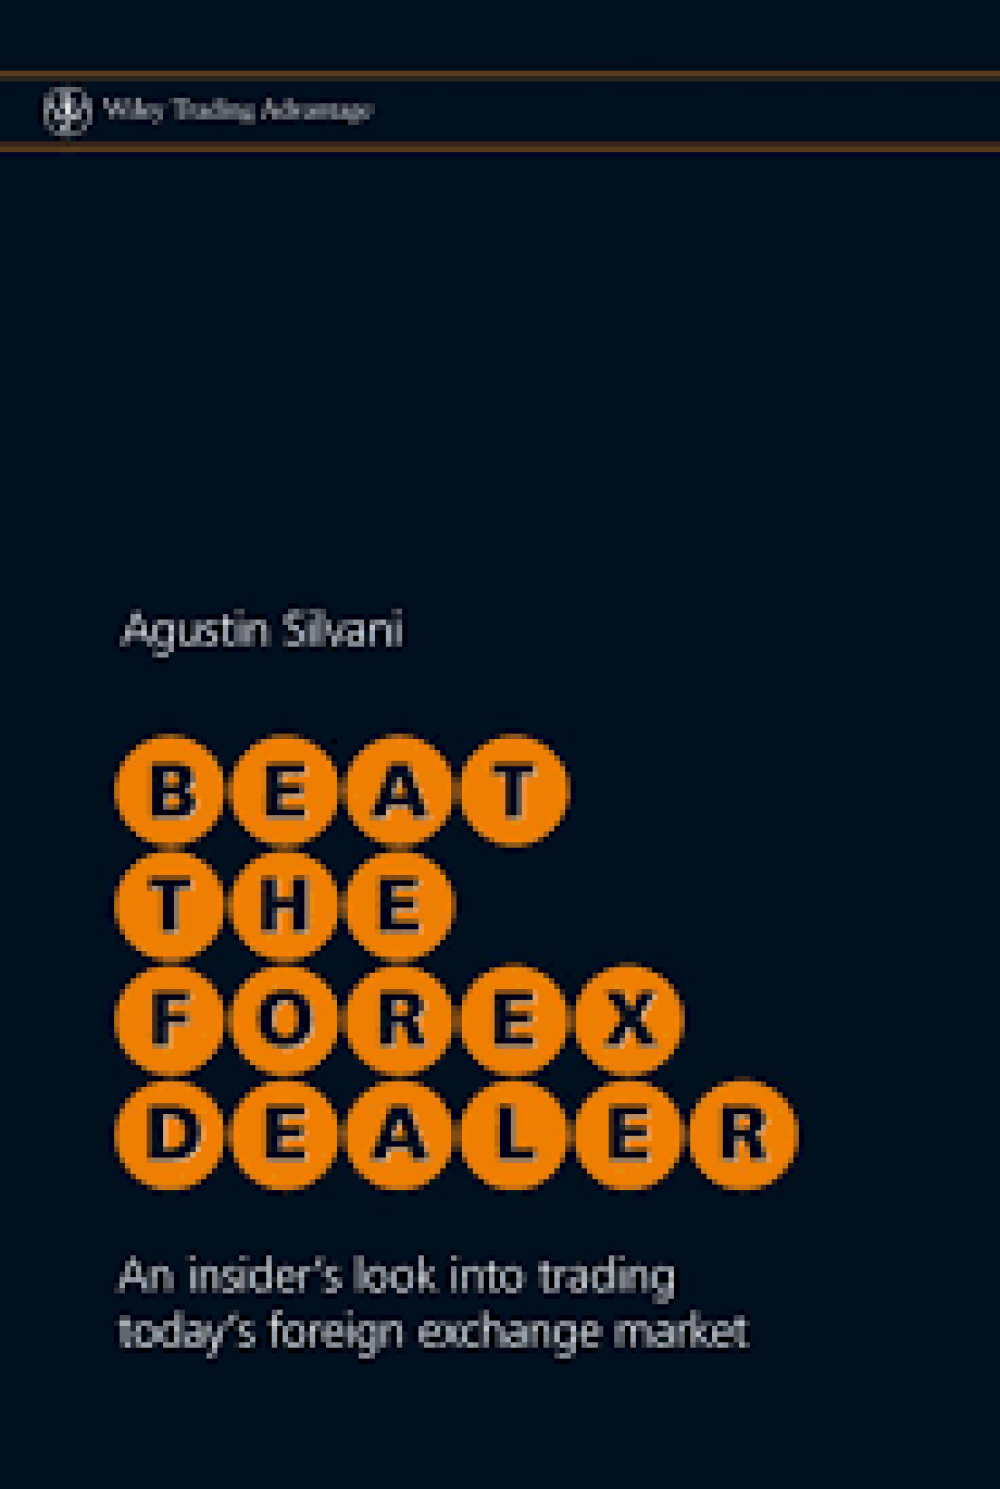 Beat the forex dealer review pharma ipo 2015